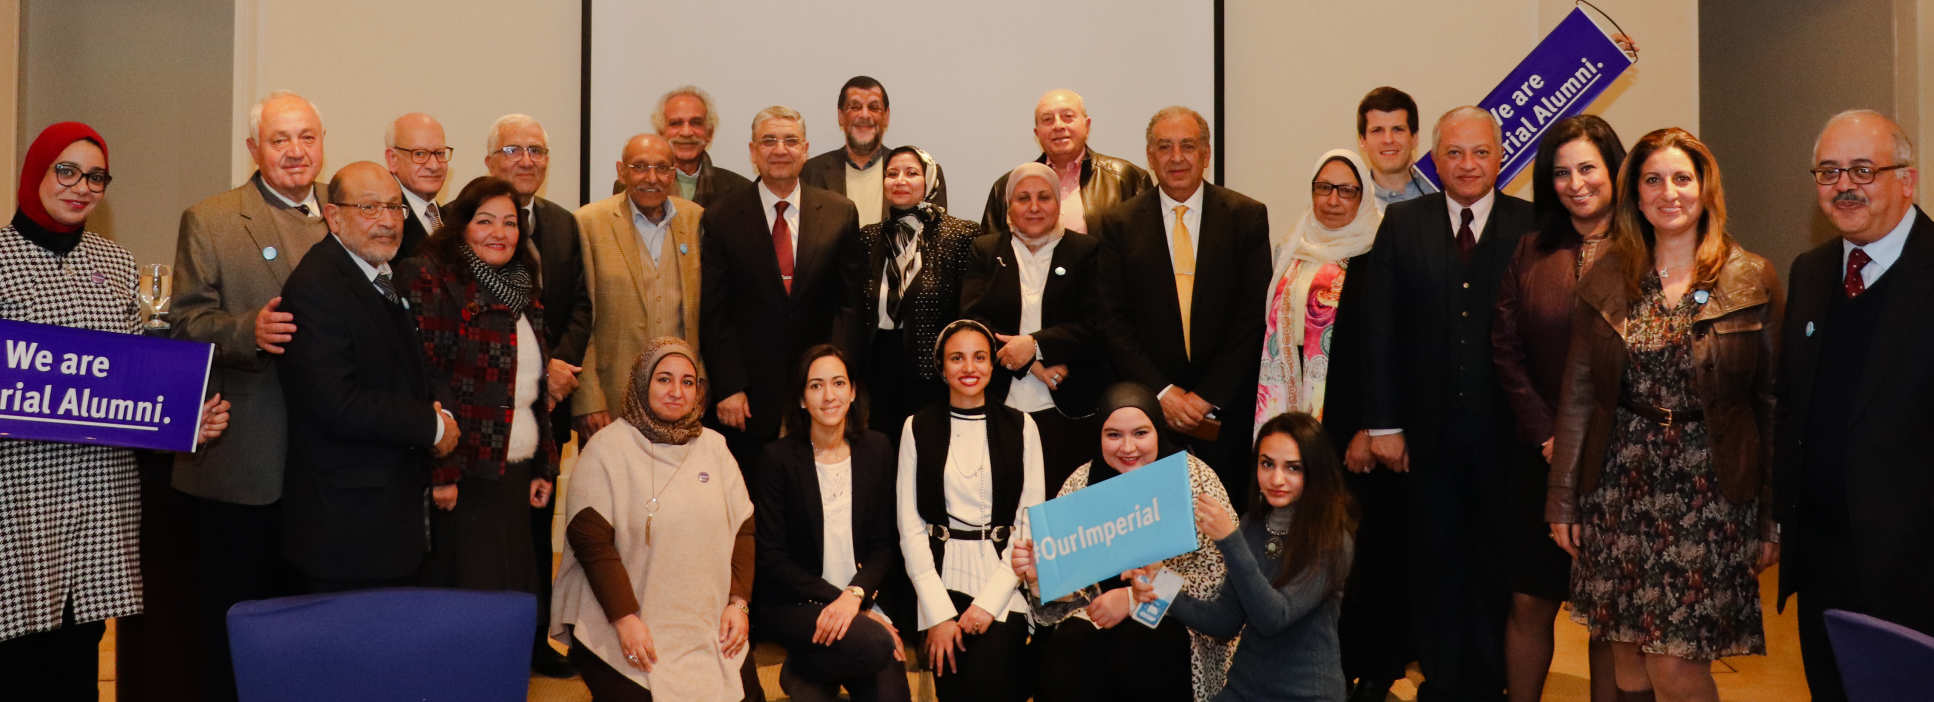 The first Imperial alumni event in Egypt was held in Cairo